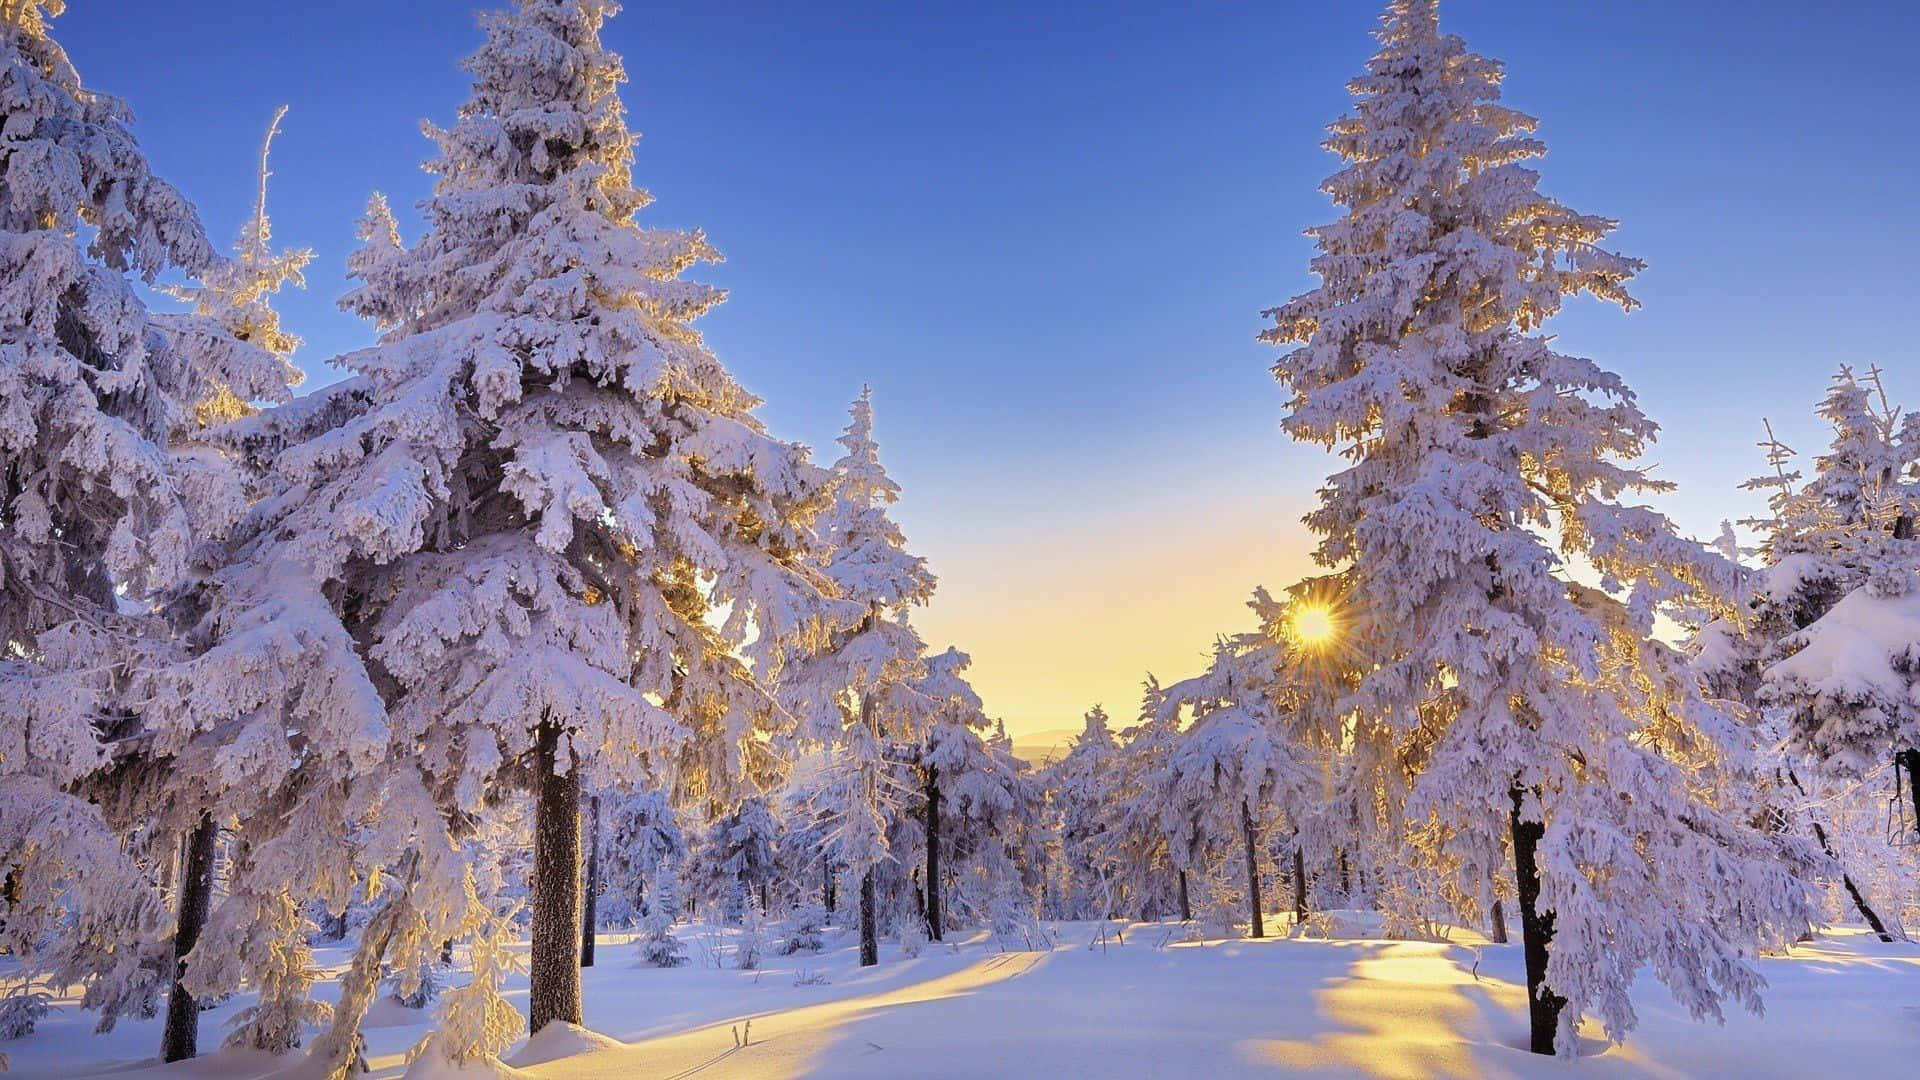 A scenic winter landscape surrounded by snow-covered trees